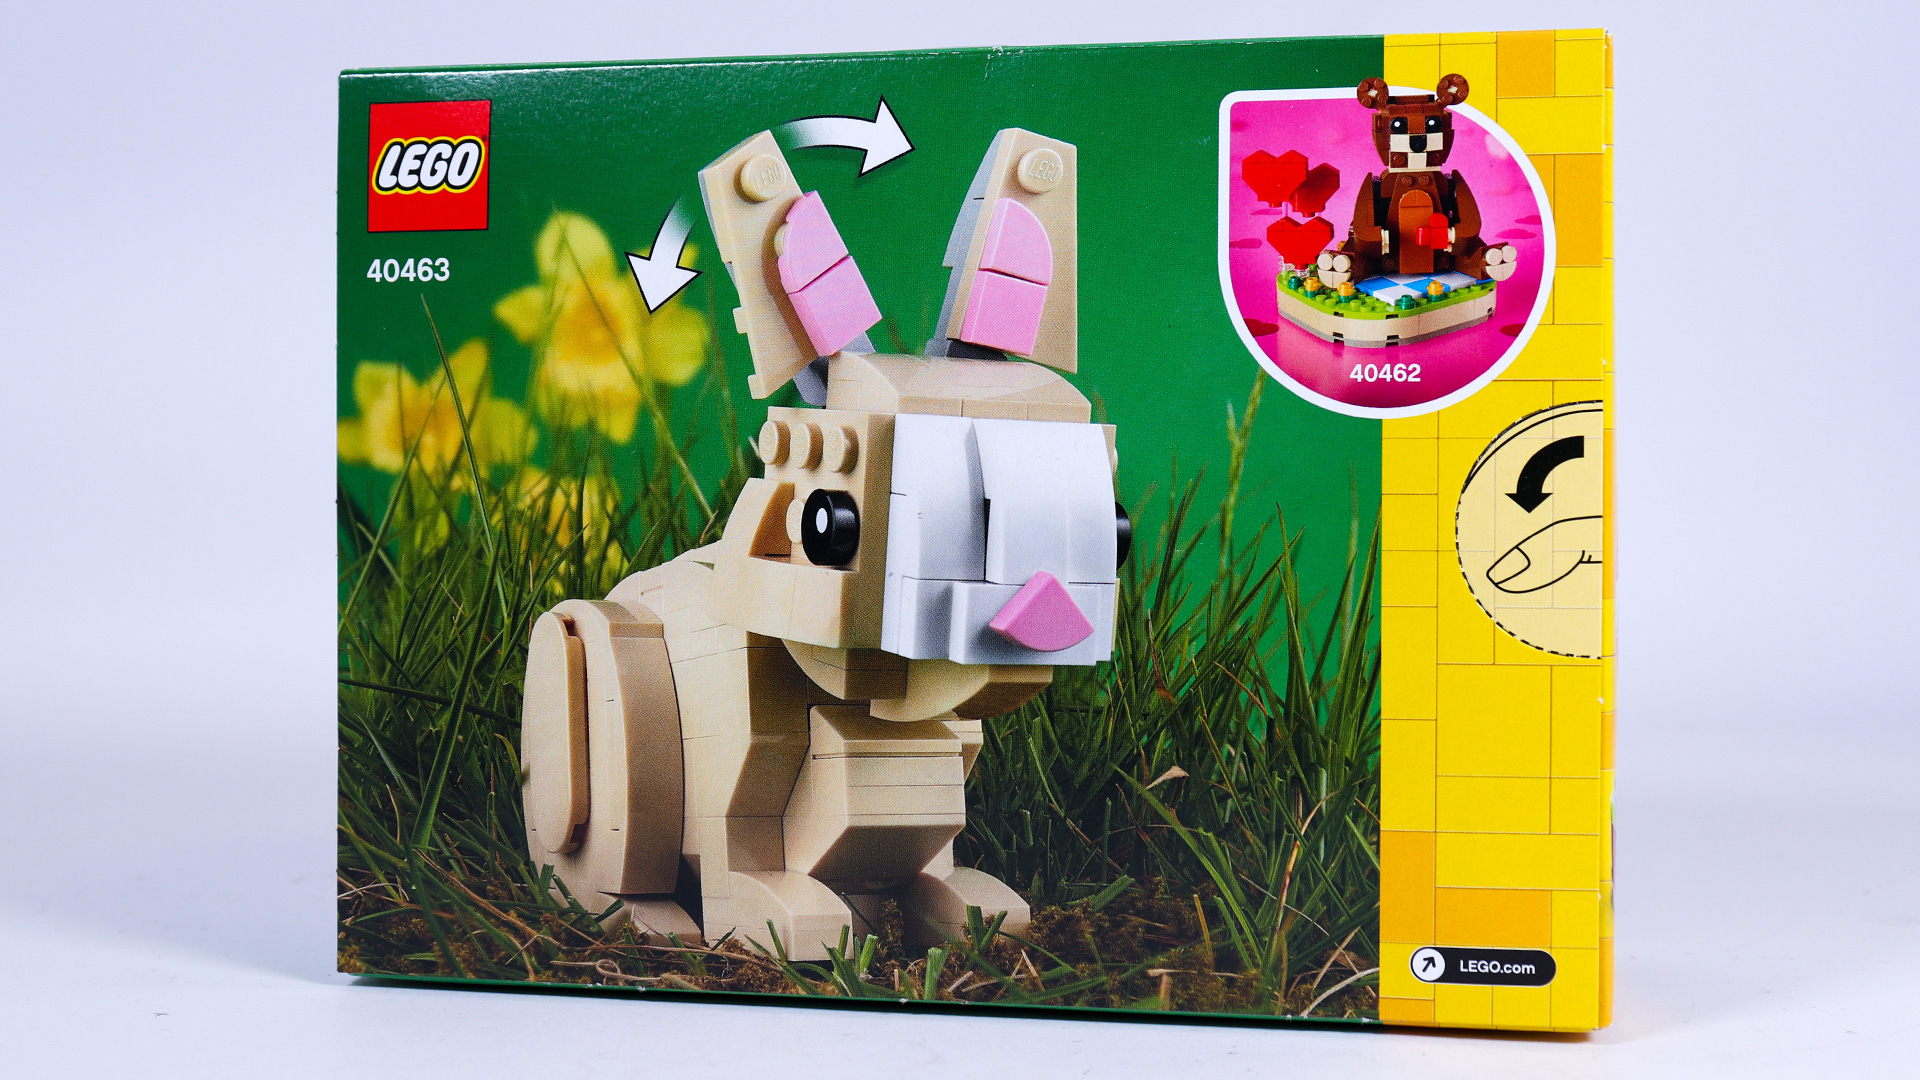 Meet the Easter Bunny! If you’re hunting for a special Easter treat, look no further. The cute LEGO® Easter Bunny (40463) has arrived! This lovable character, in a green meadow setting, comes with 2 customizable Easter eggs, posable head and ears and a hidden LEGO surprise. A fun way to wish kids, friends or family members a “Happy Easter